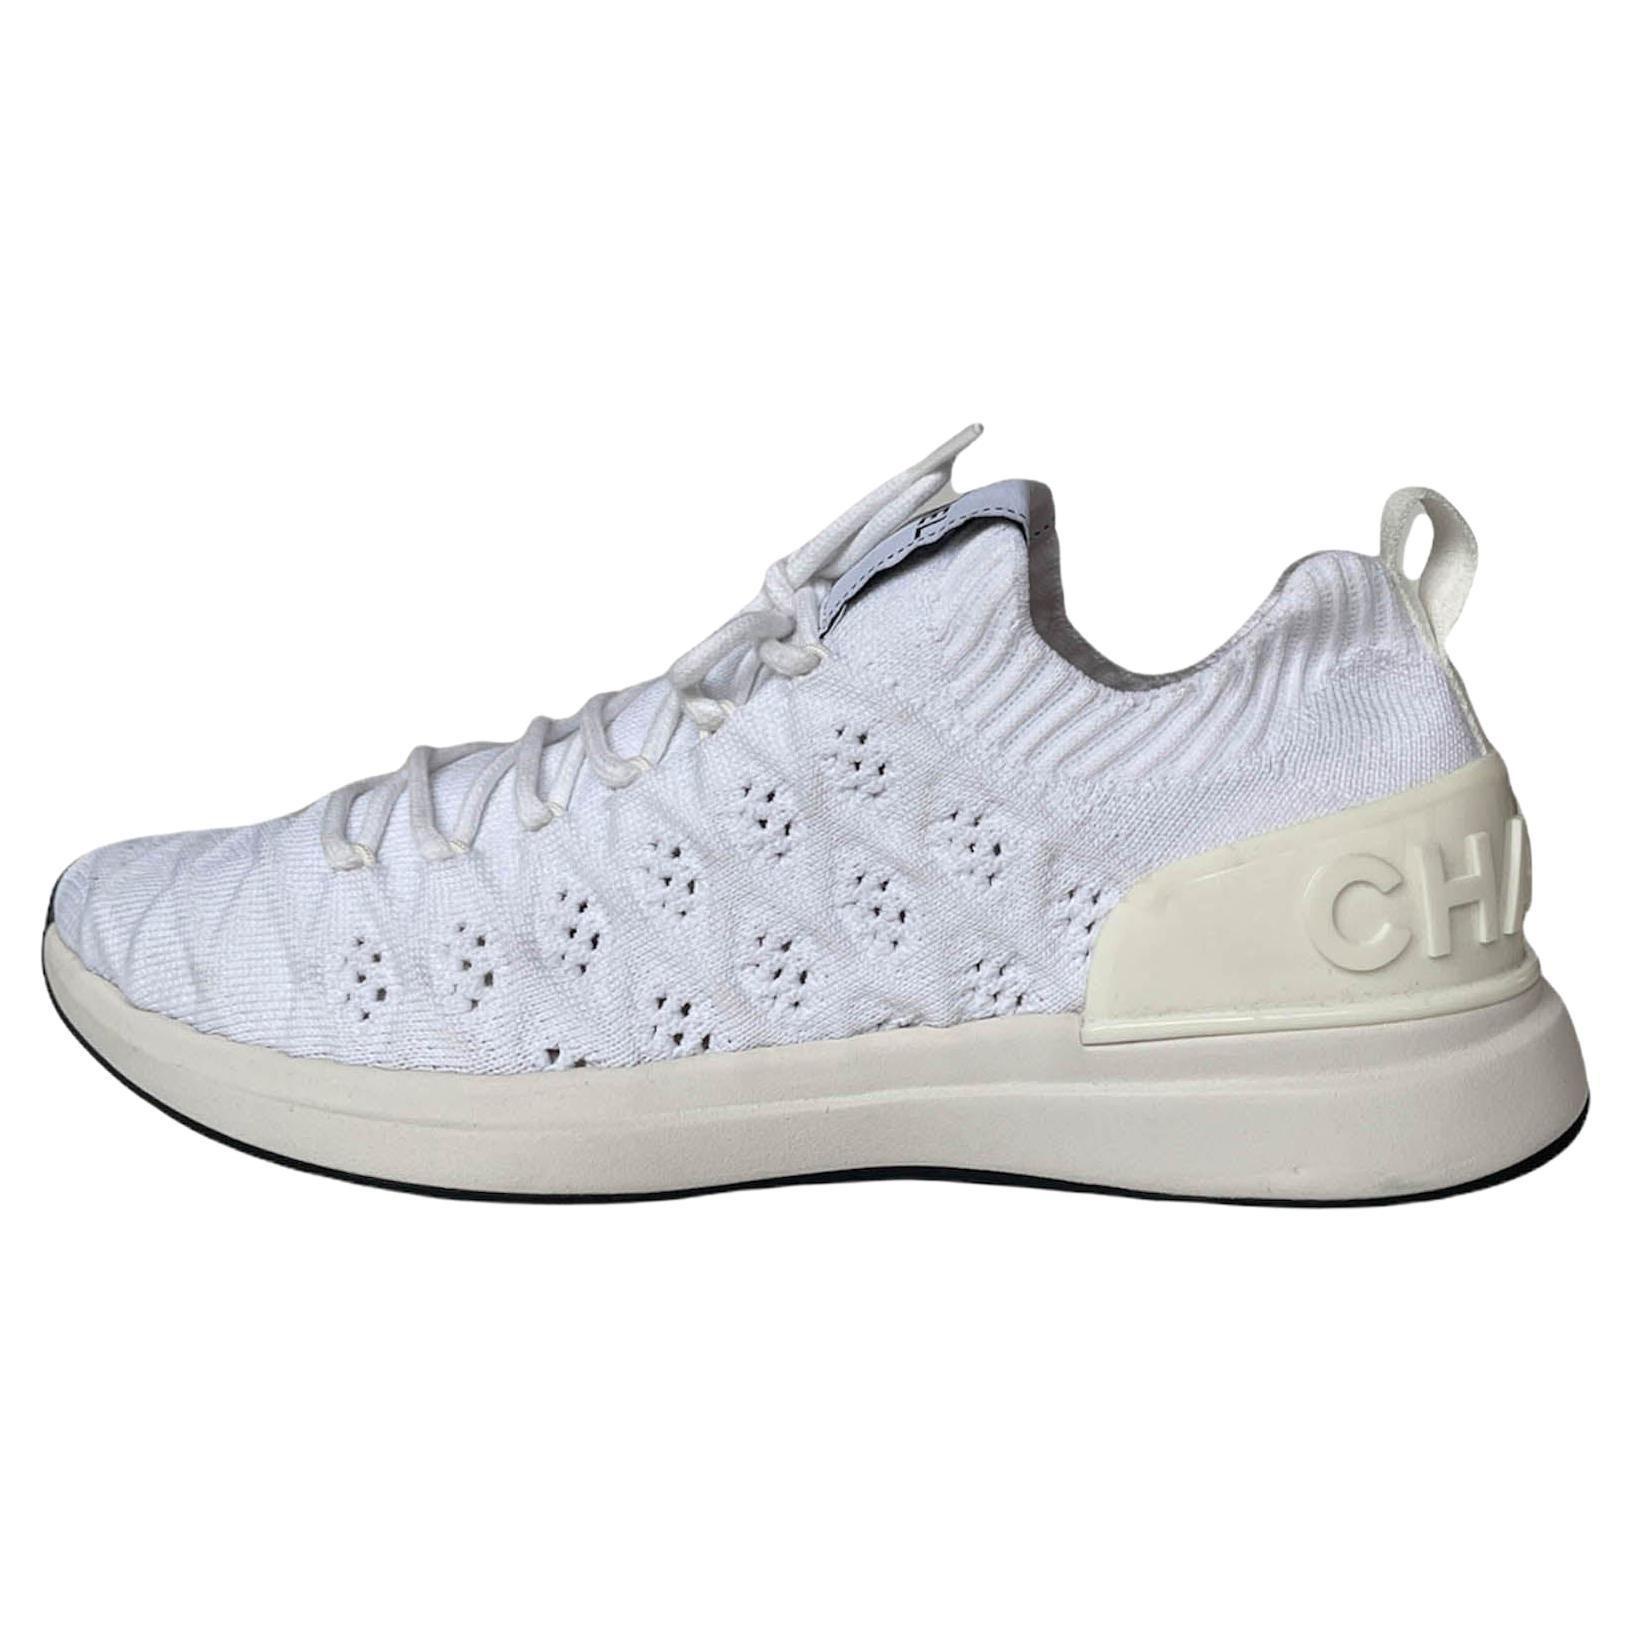 Chanel white lace up sock sneakers trainers sports shoes flat women fabric  lady 120215